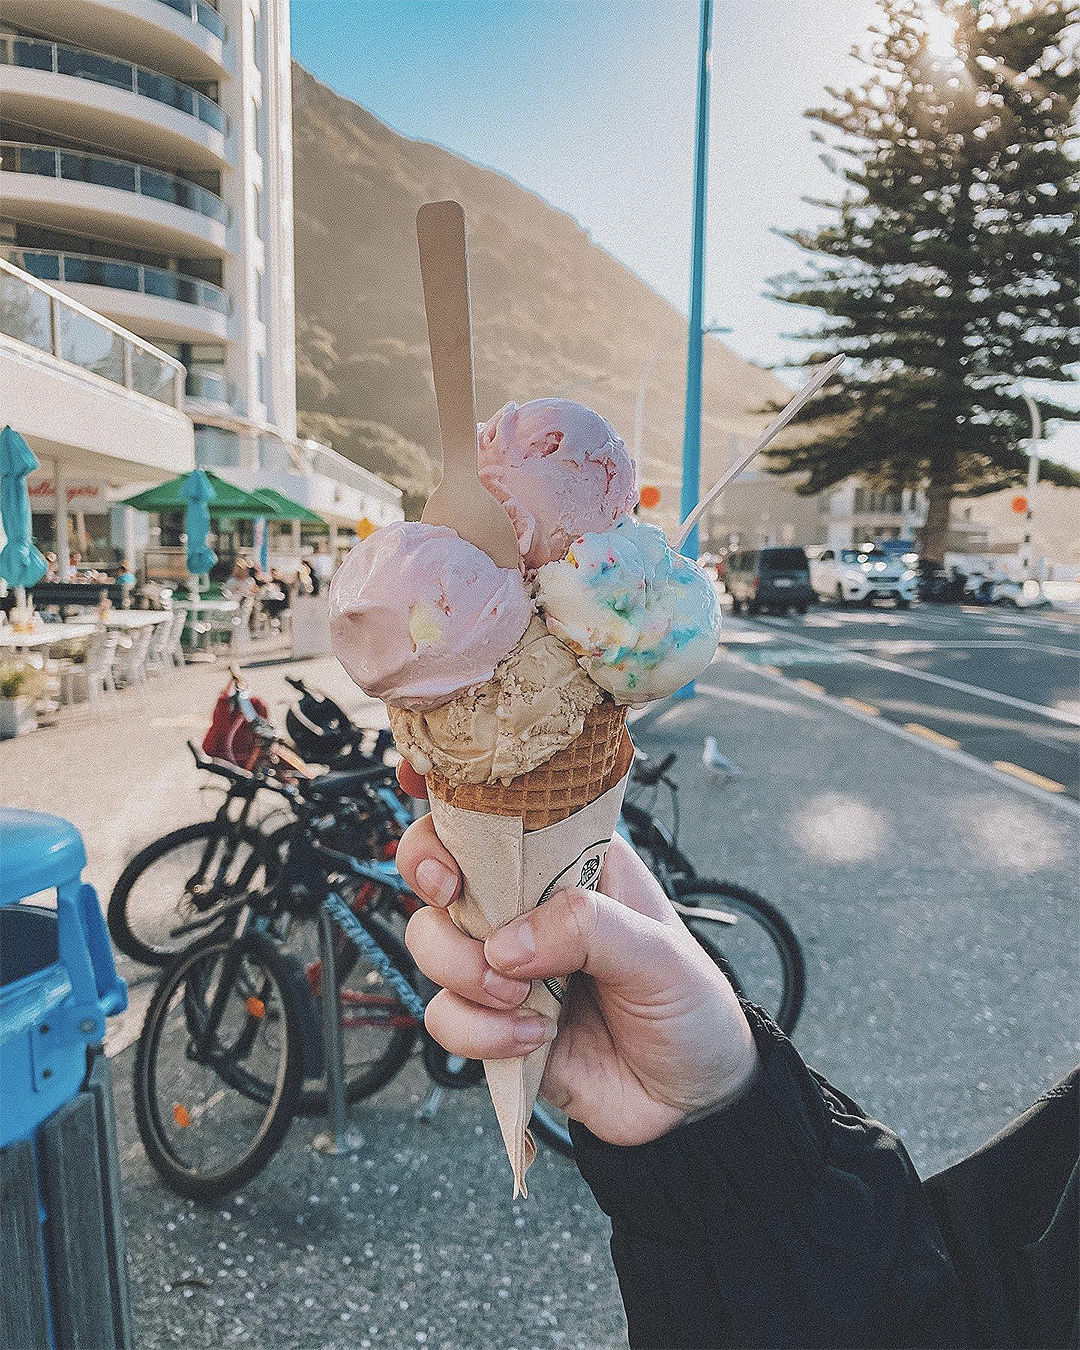 A person holds up an impressive stack of ice cream on a cone from Monte Gelato.